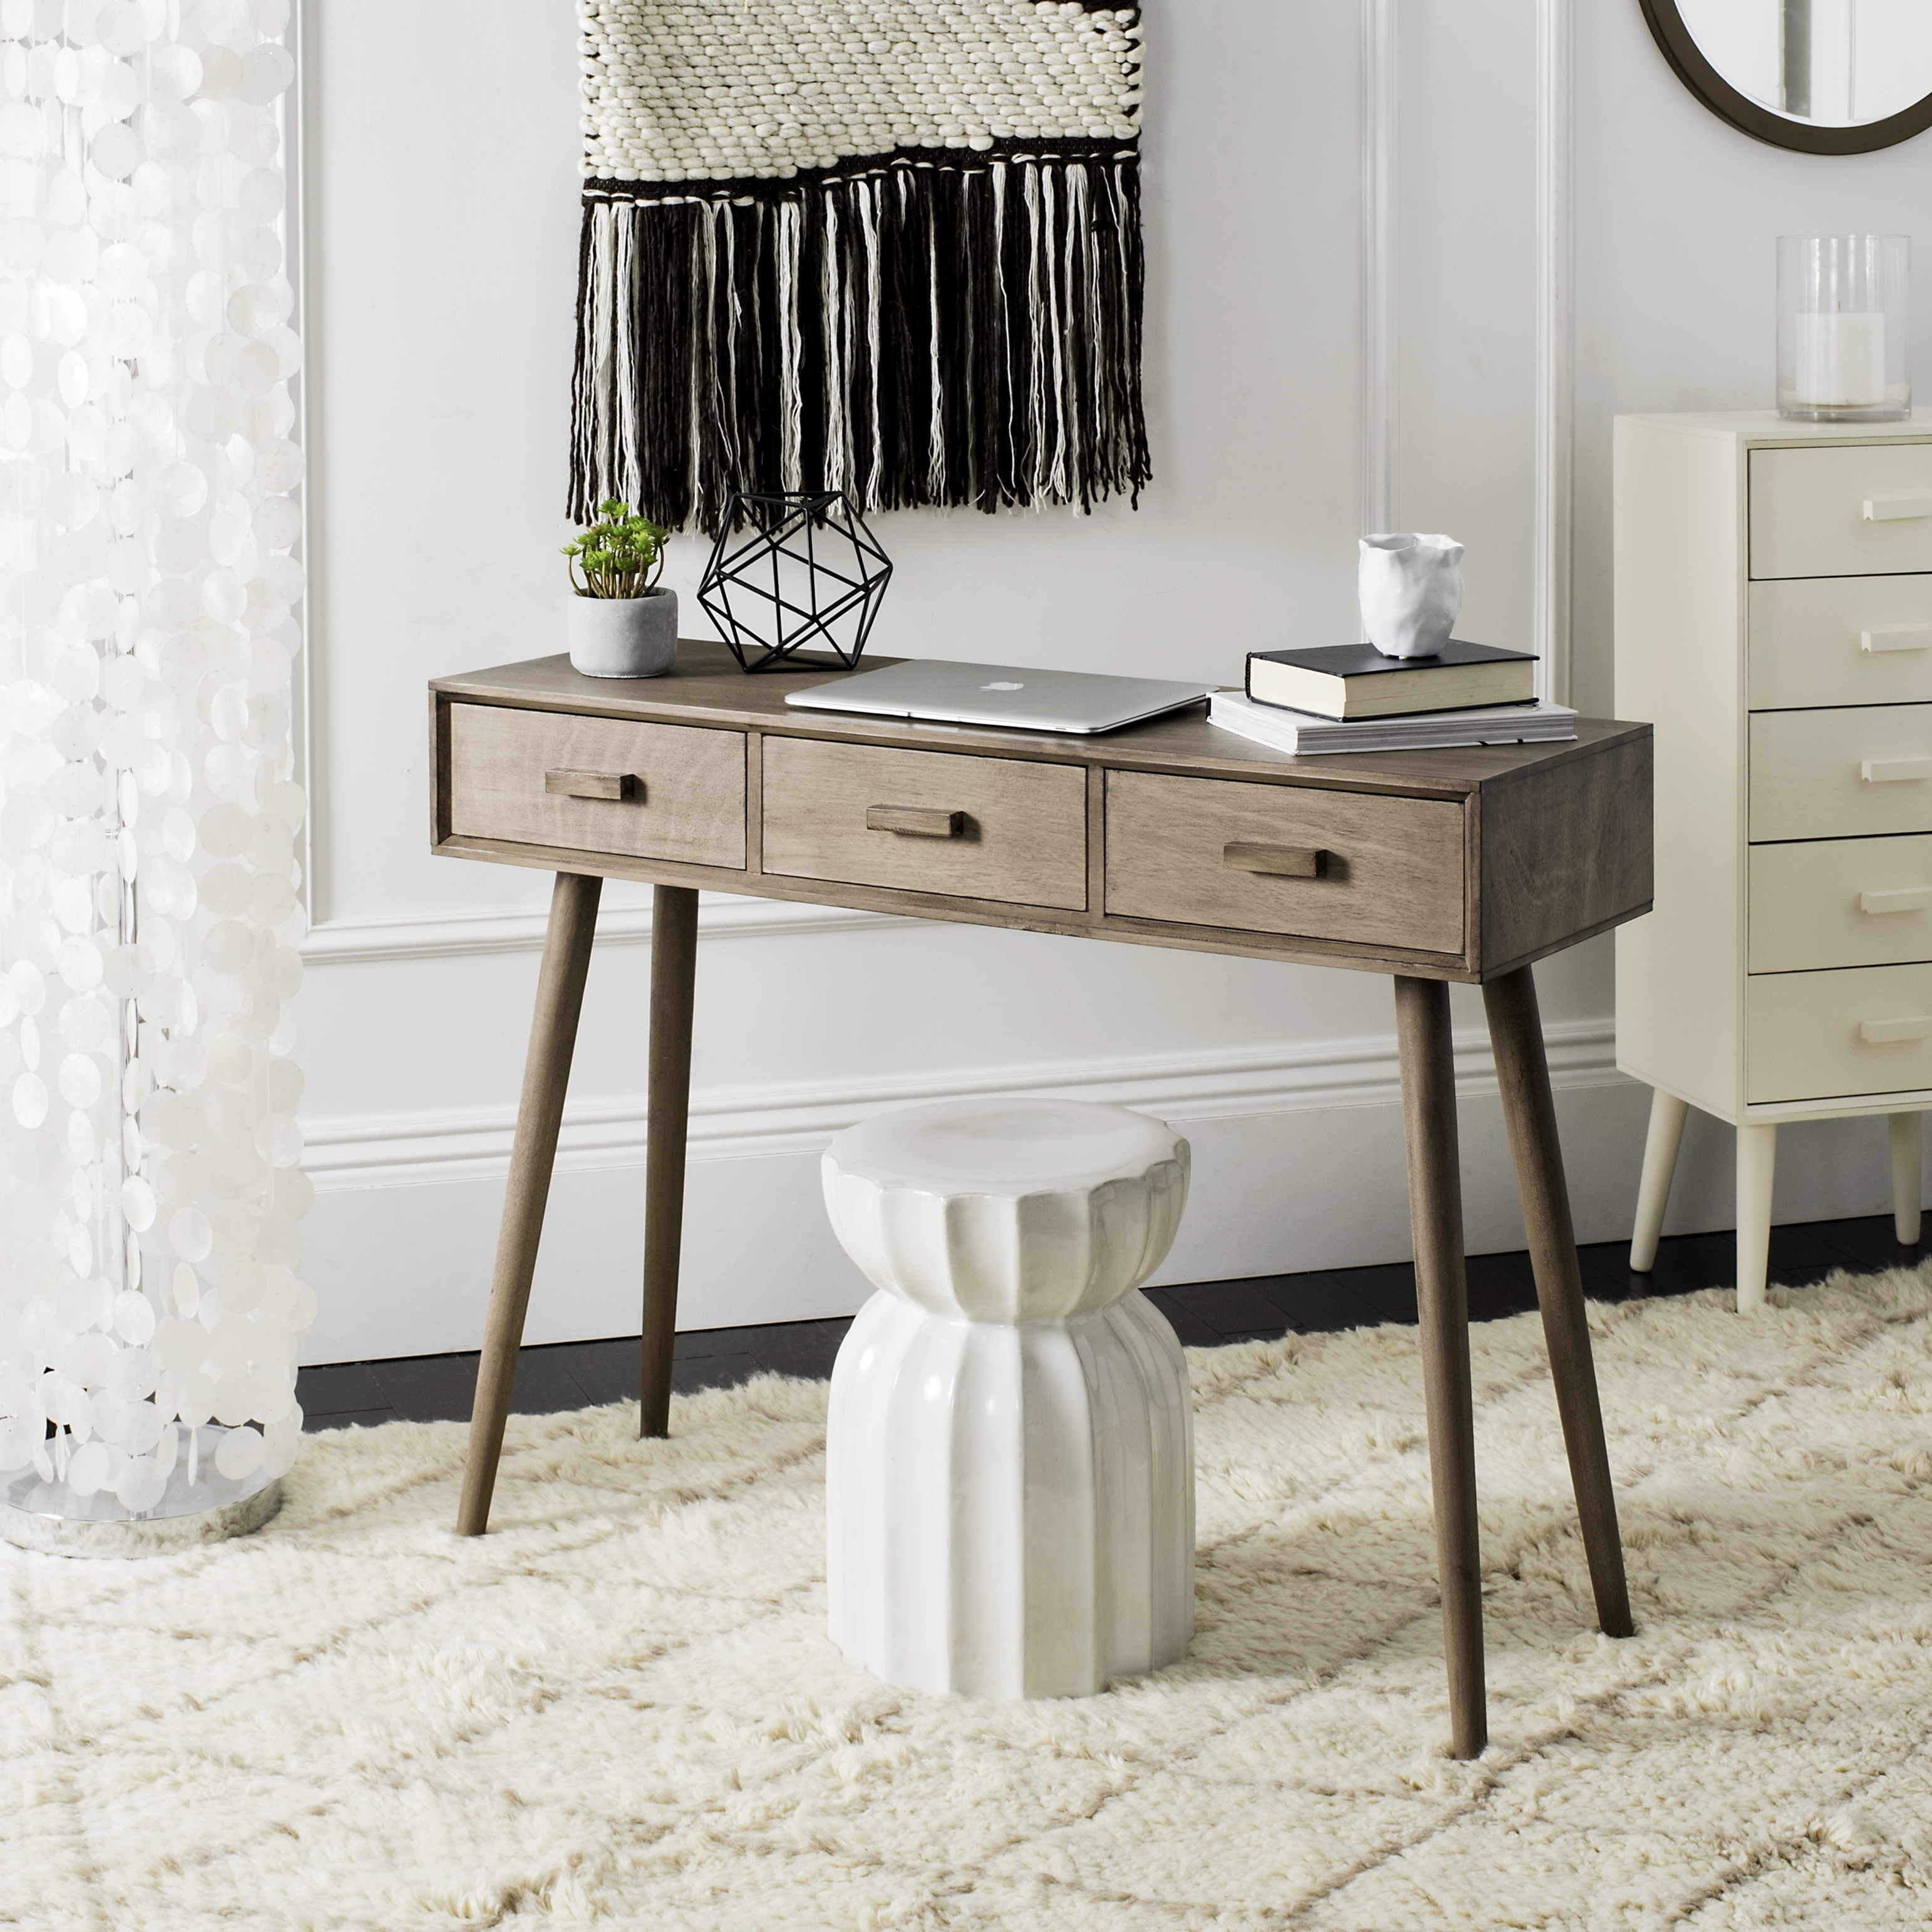 Albus 3 Drawer Console Table - Desert Brown - Arlo Home - Image 1